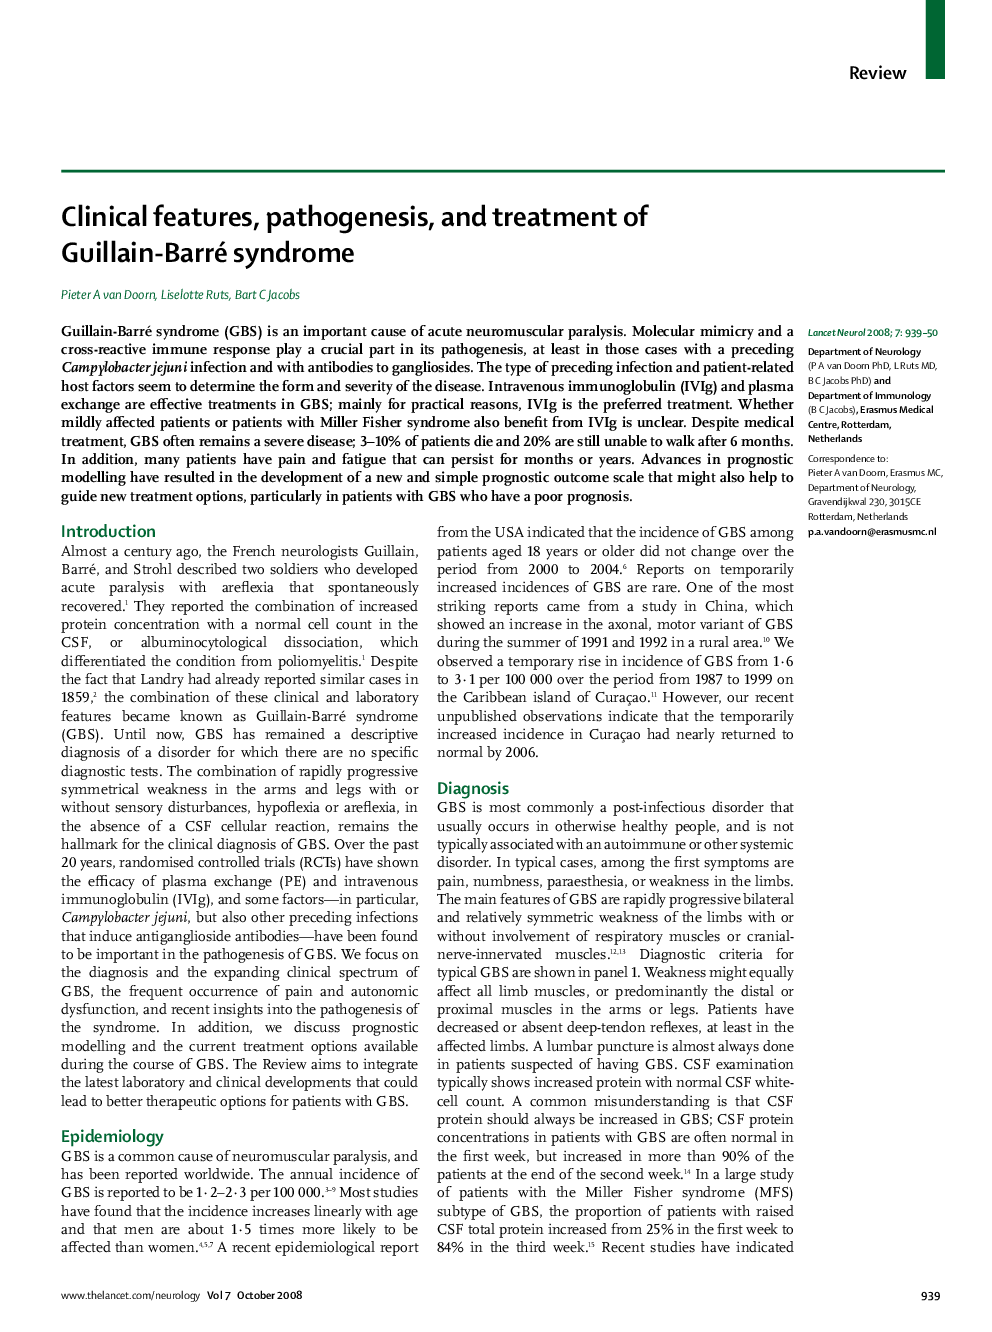 Clinical features, pathogenesis, and treatment of Guillain-Barré syndrome